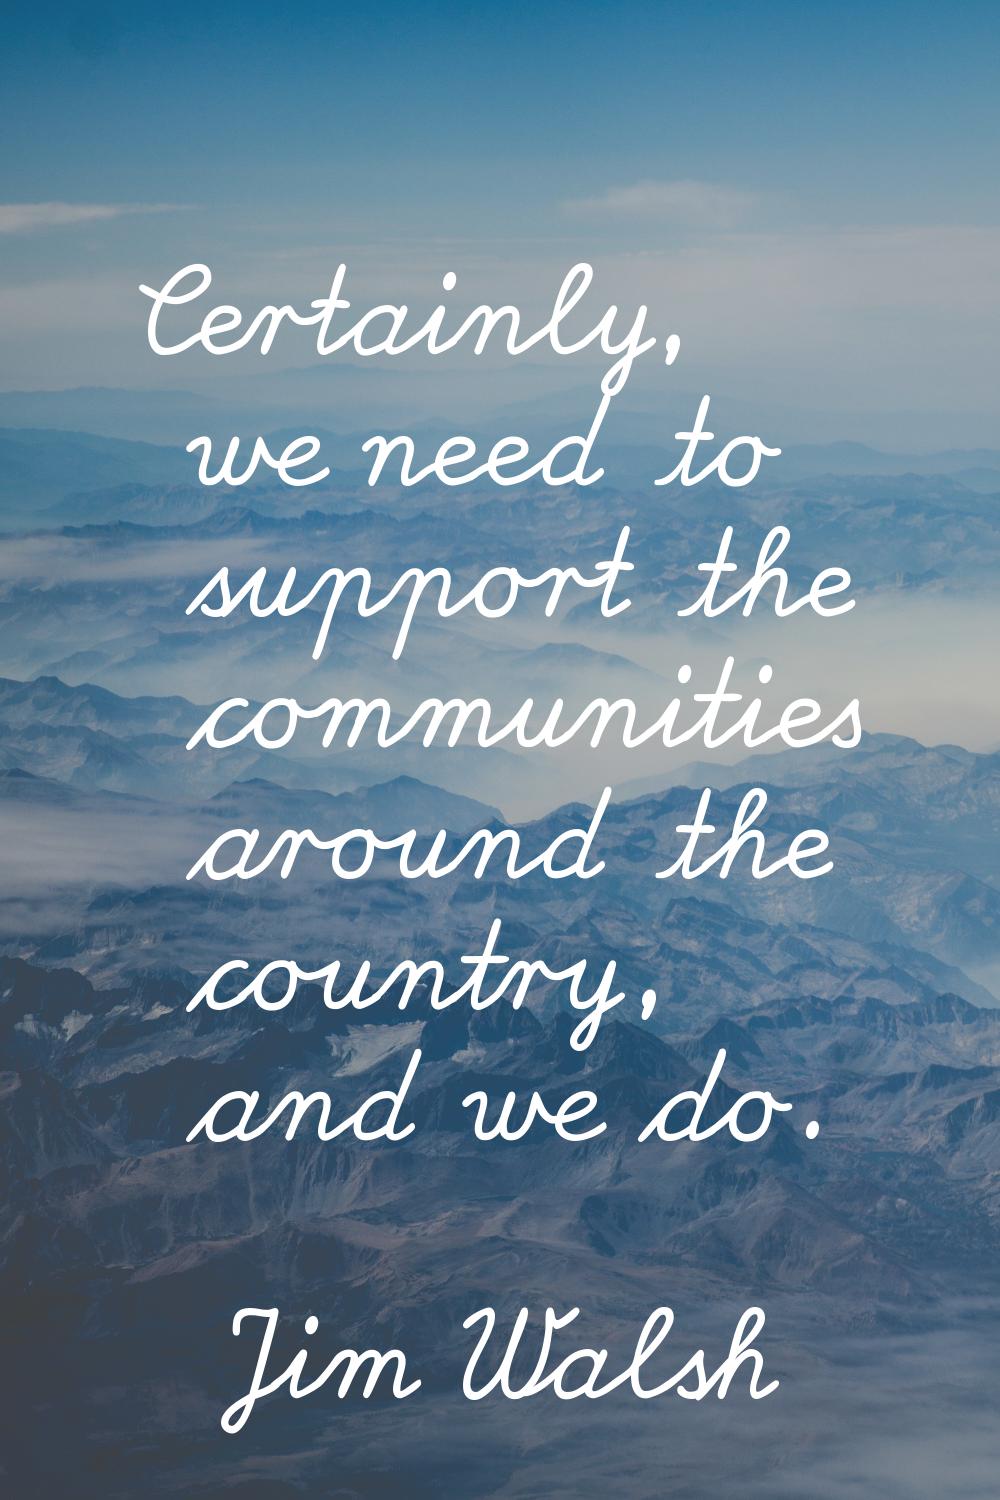 Certainly, we need to support the communities around the country, and we do.